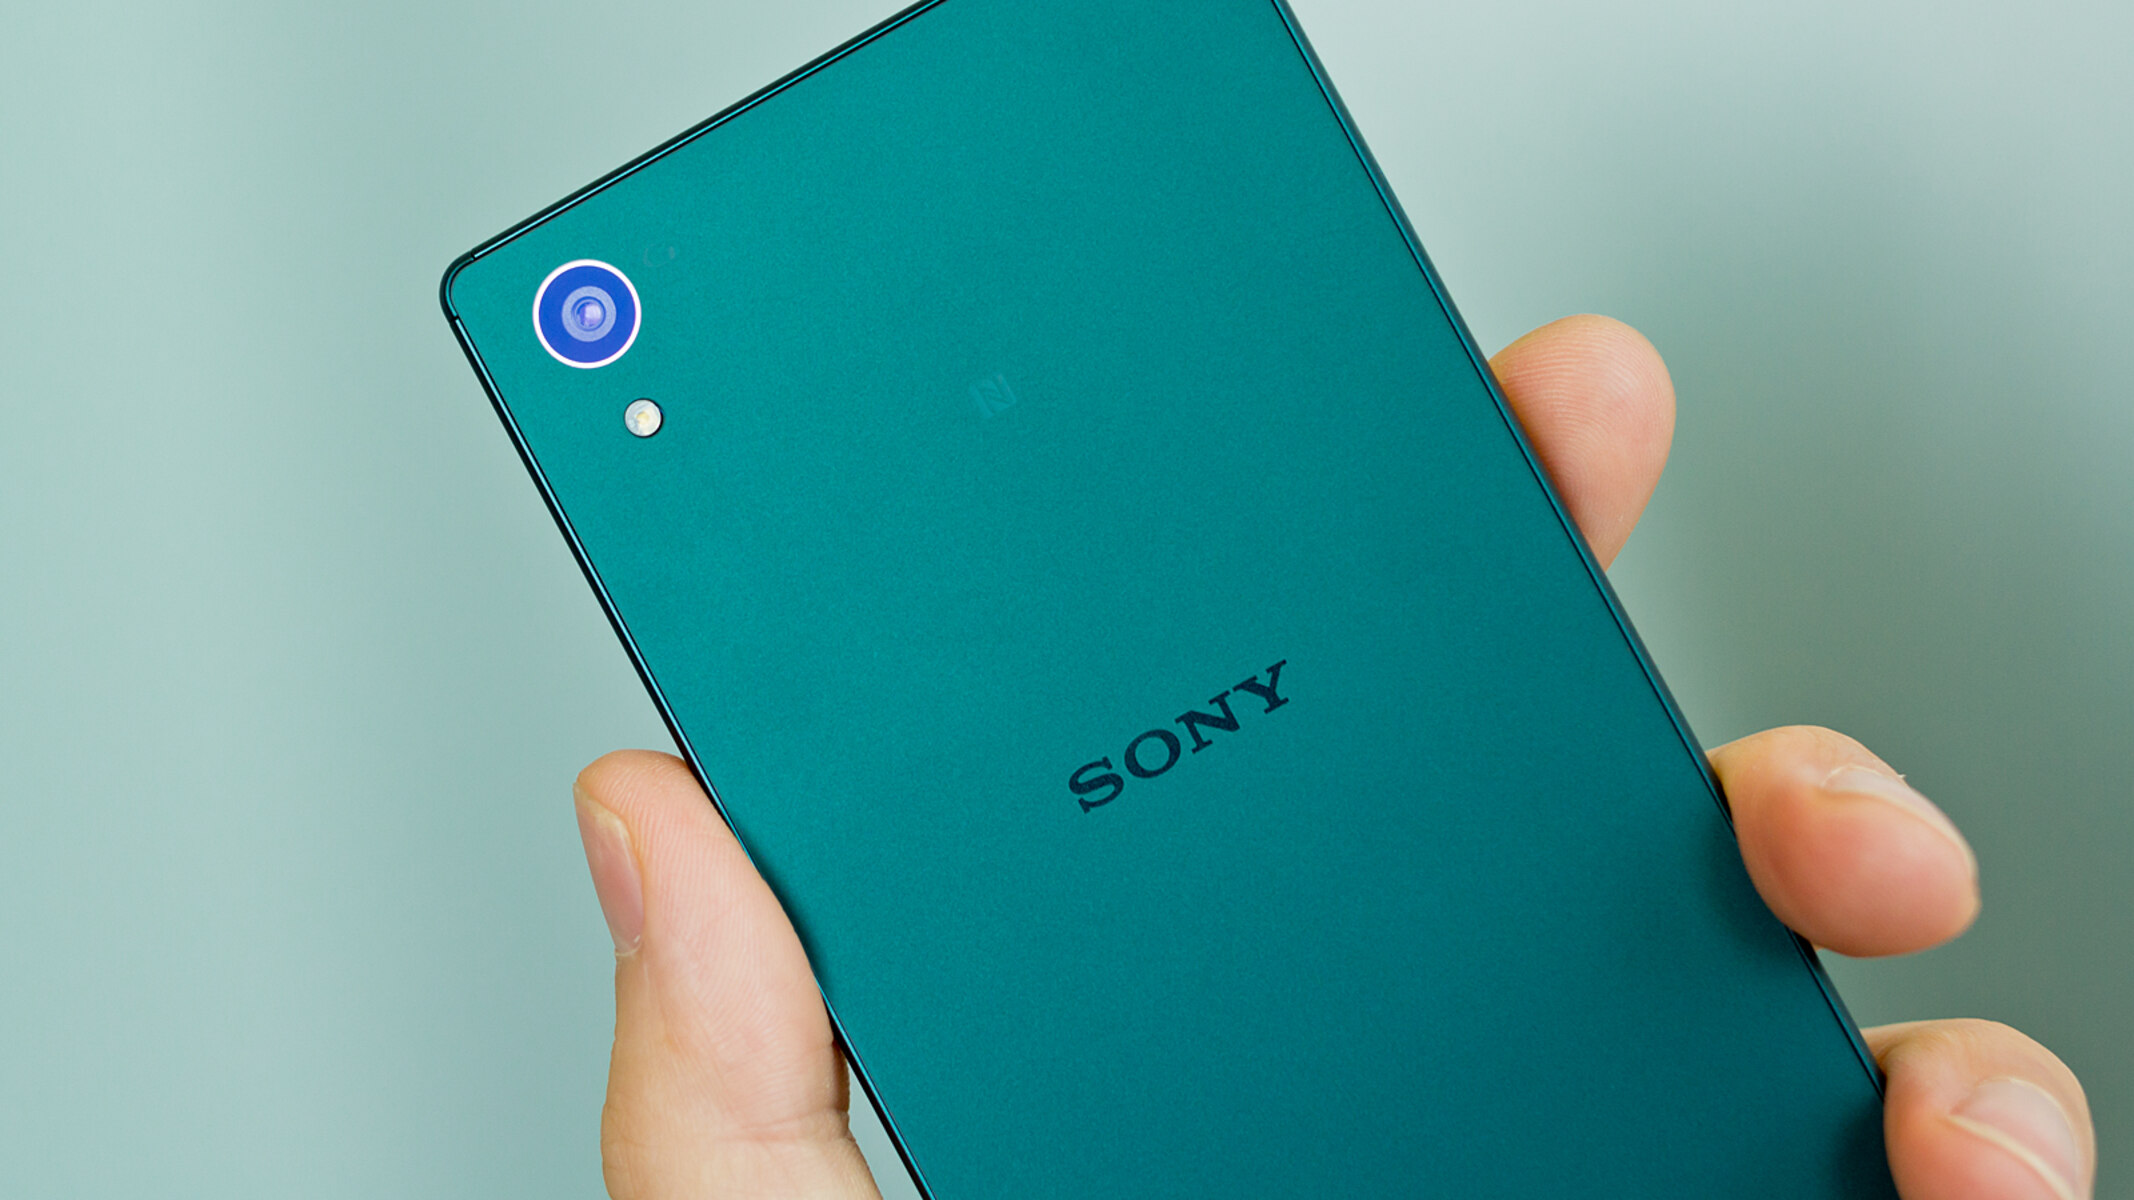 Enhancing Reception: Tips For Sony Xperia Z5 Users